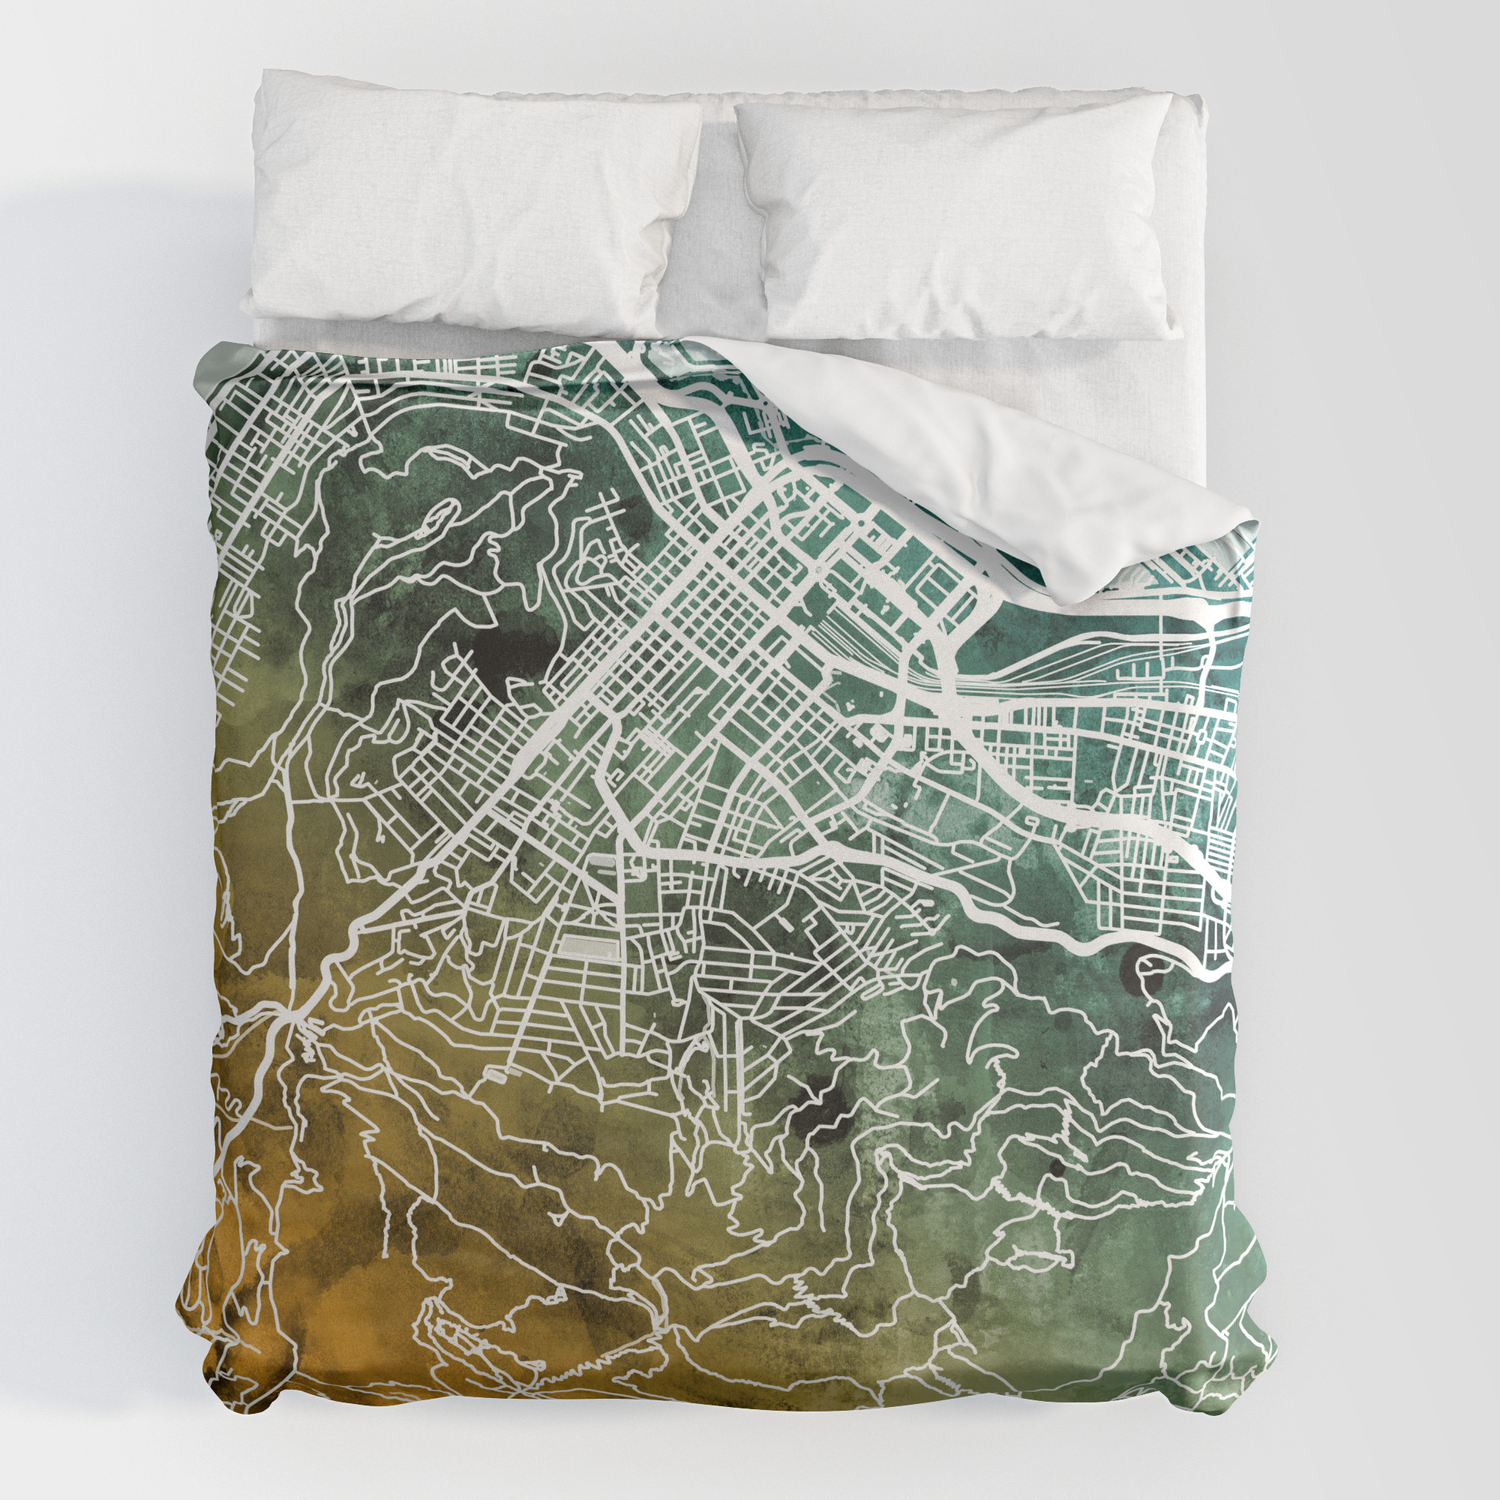 Map Duvet Cover By Artpause, Duvet Covers South Africa